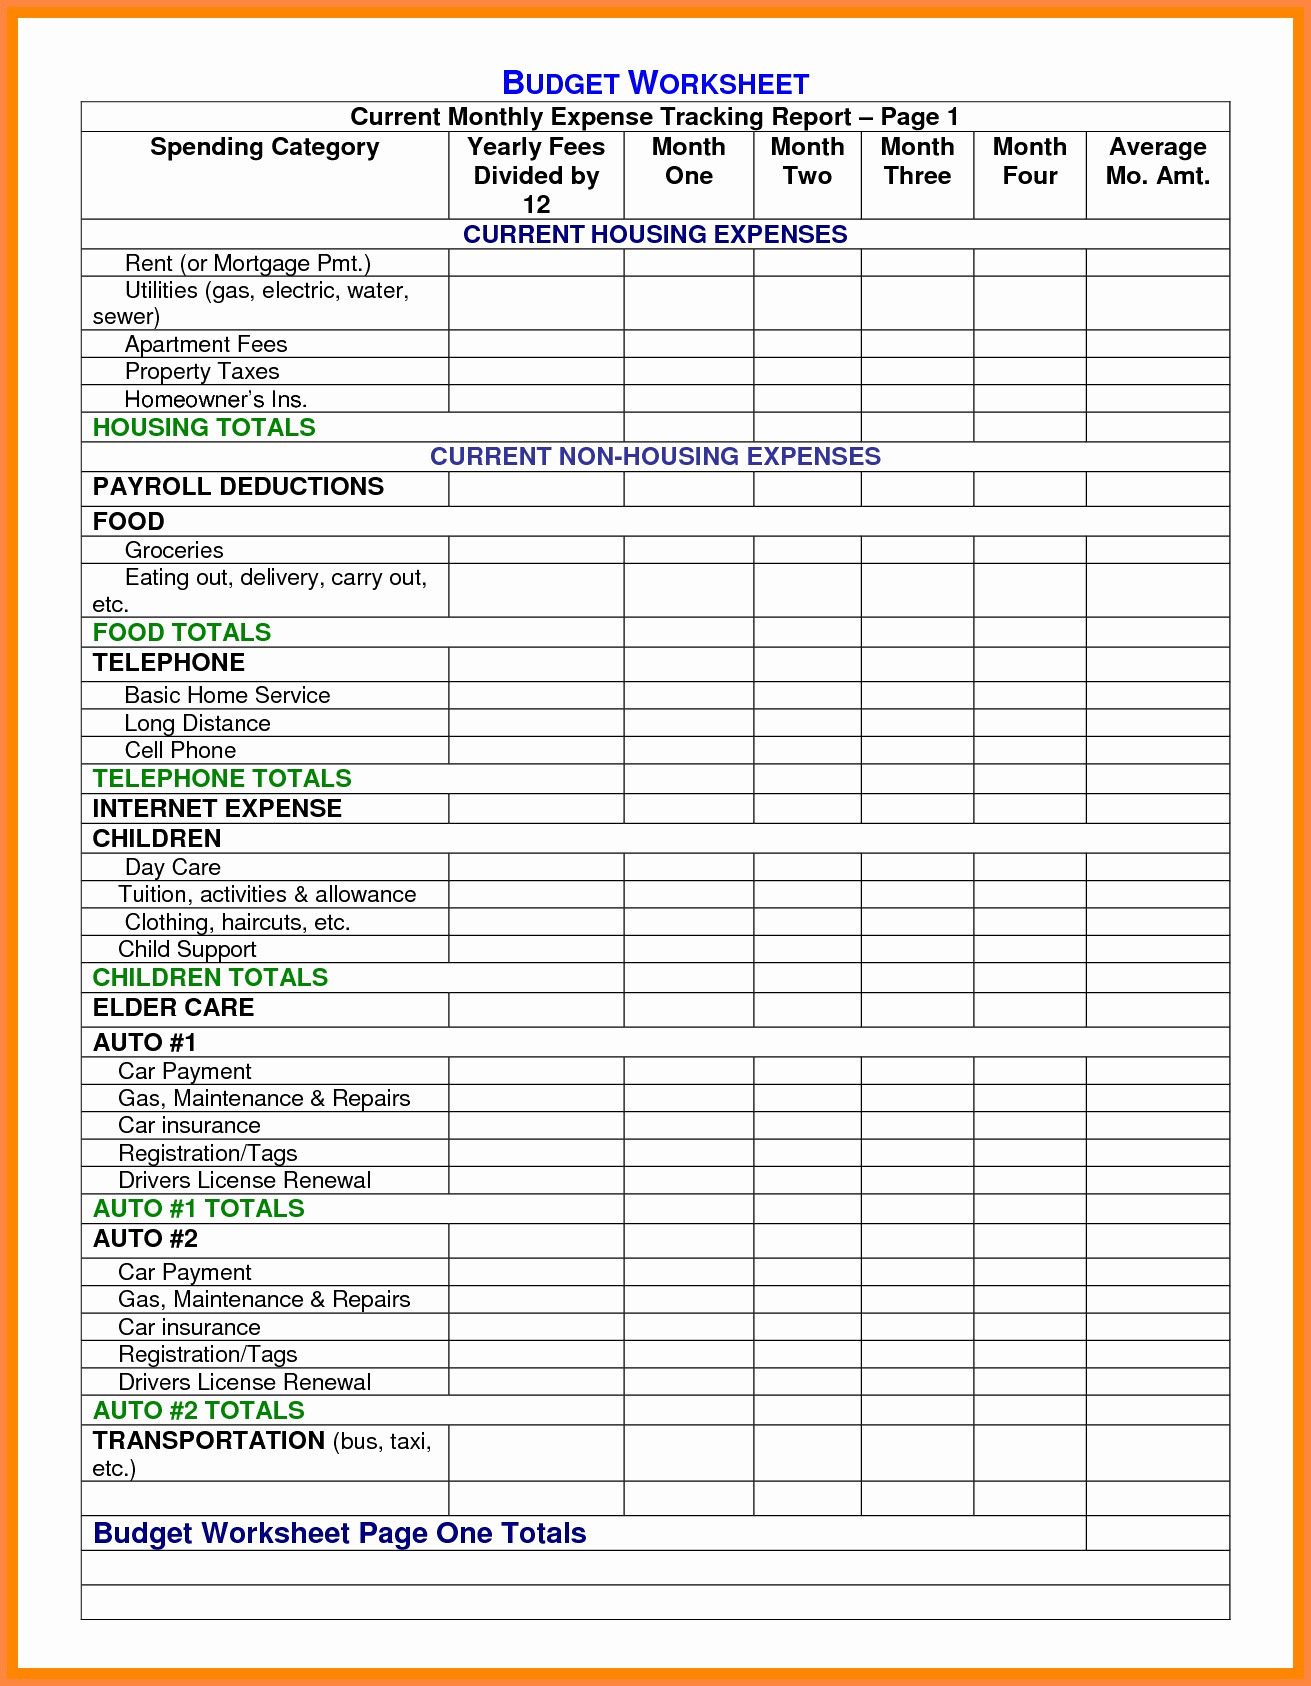 Material List For Building A House Spreadsheet db excel com